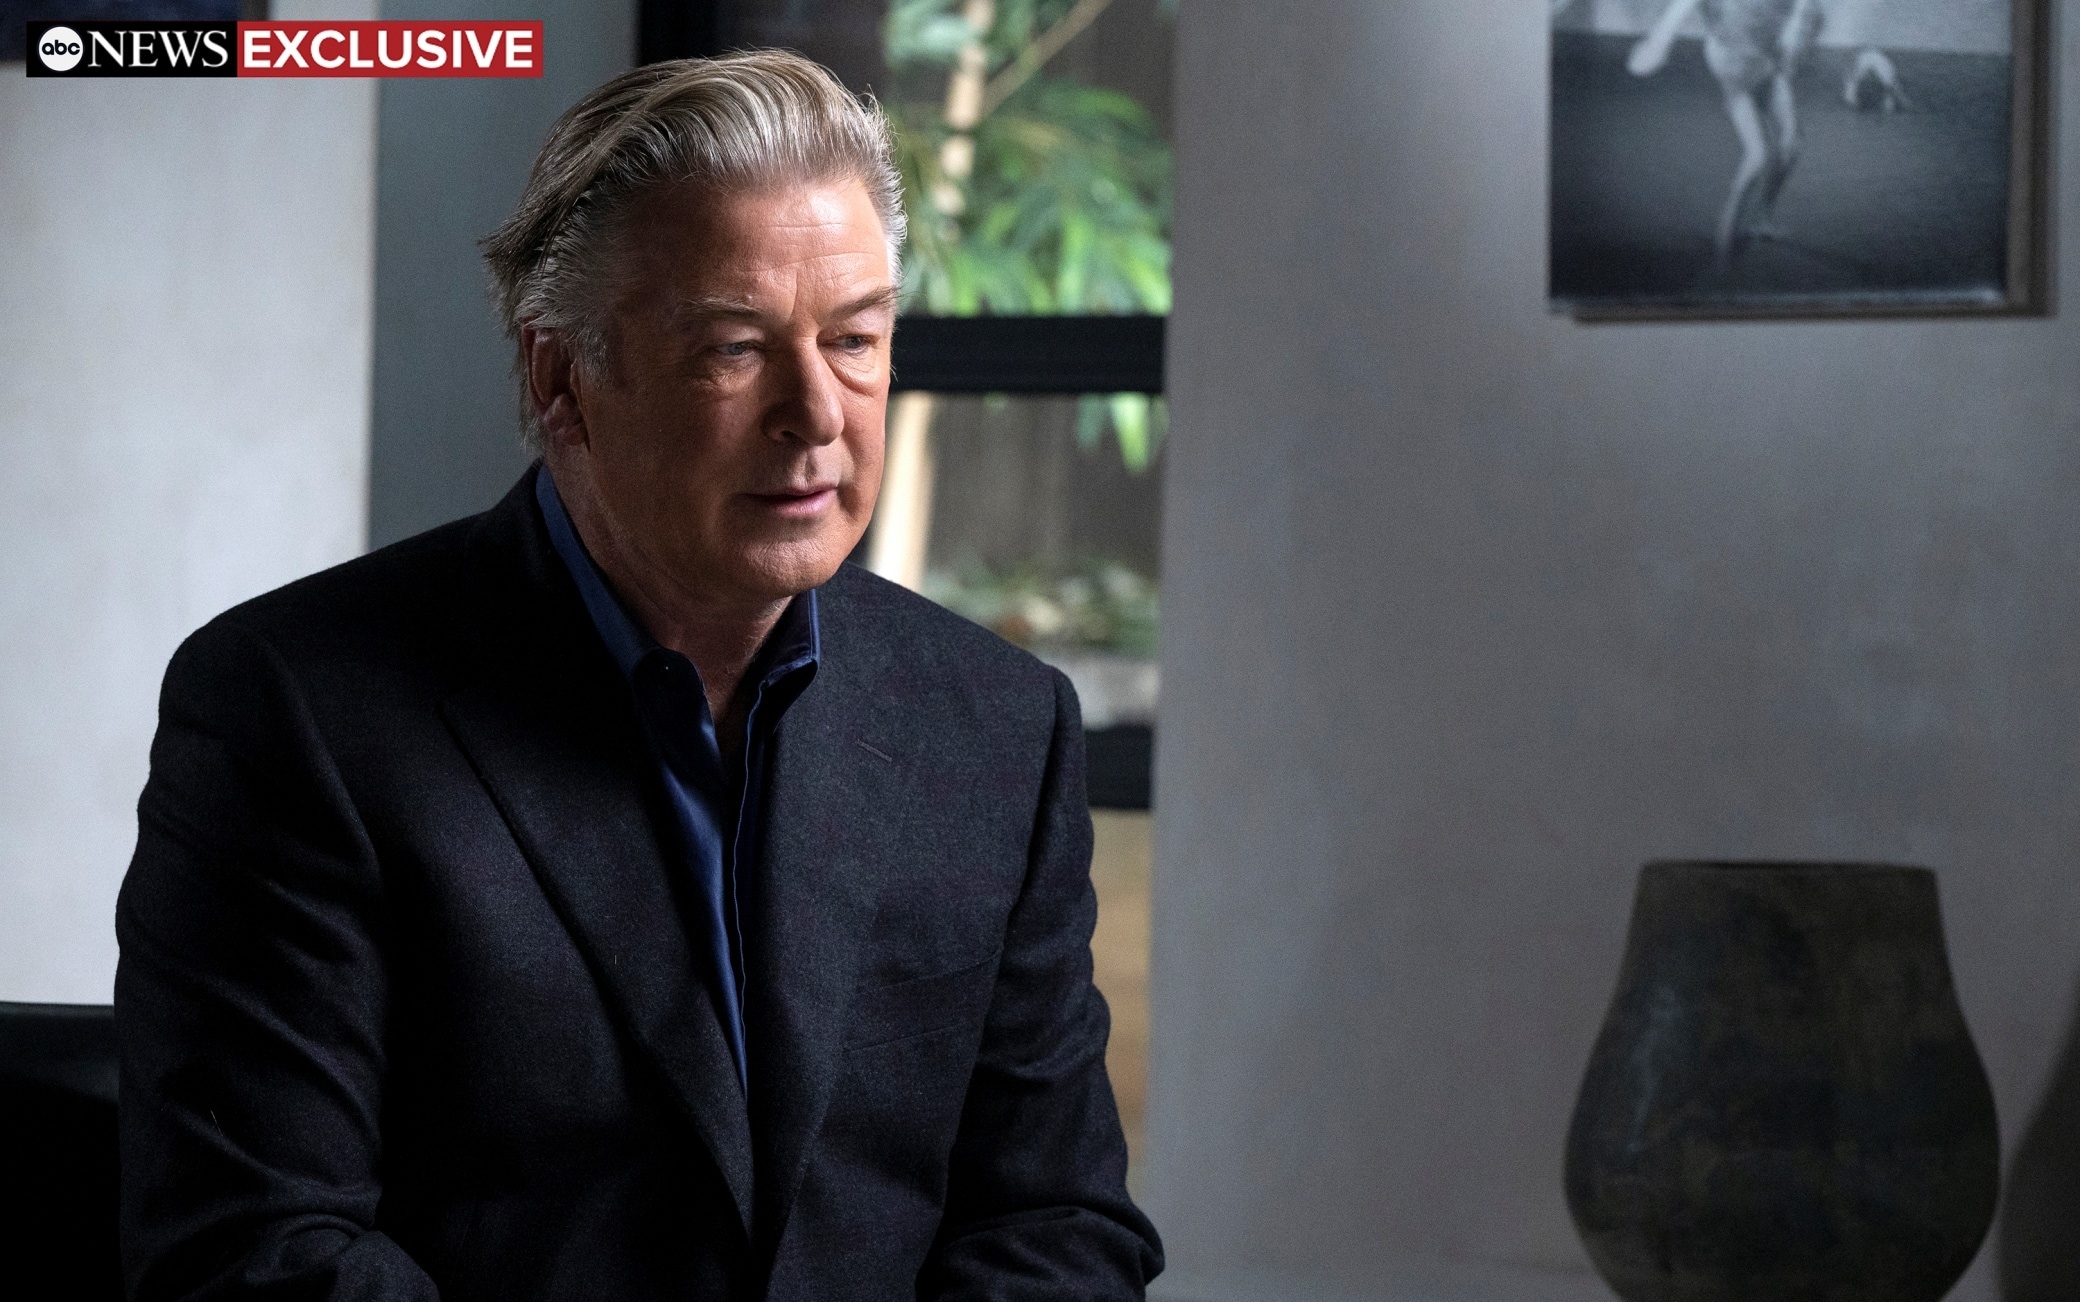 Tragedy on the set of Rust, Alec Baldwin defends himself: “I never pulled the trigger”